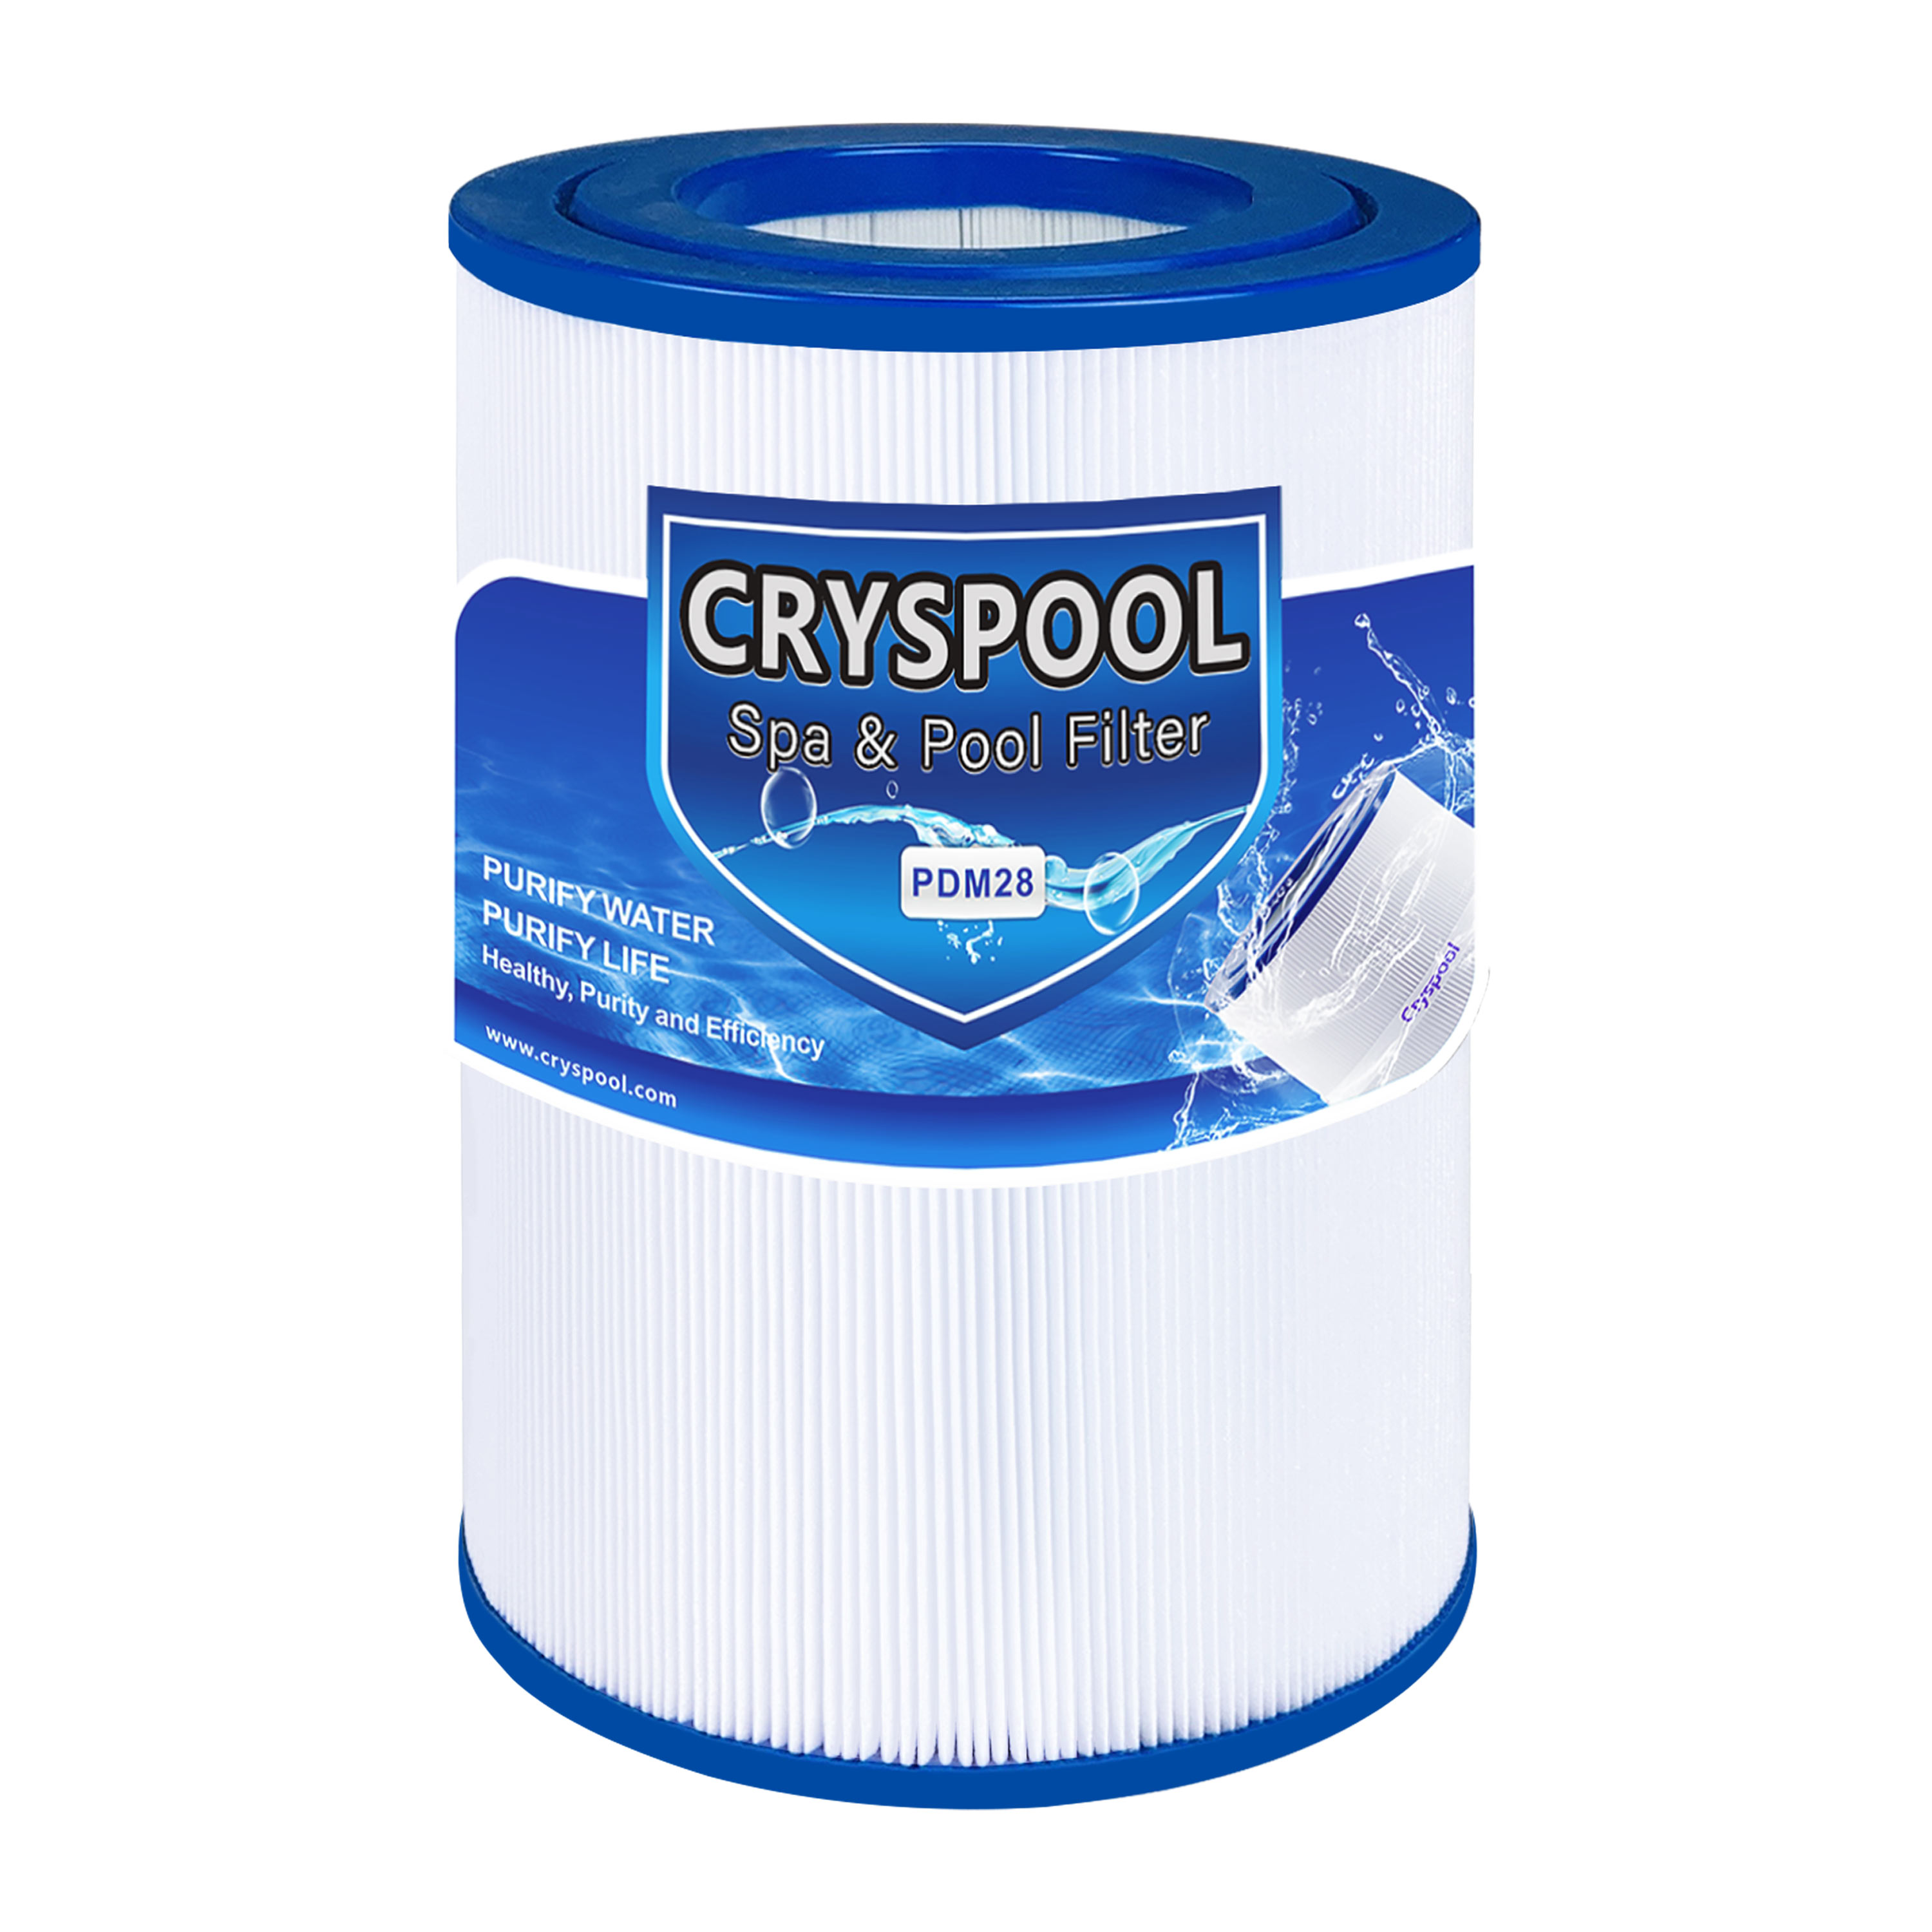 China Cheap price Hot Spot 33521 - Cryspool Hot Tub Filter(not Oval) Replacement for Spa Filter Aqua Crest PDM28 461273, Dream Maker – Cryspool